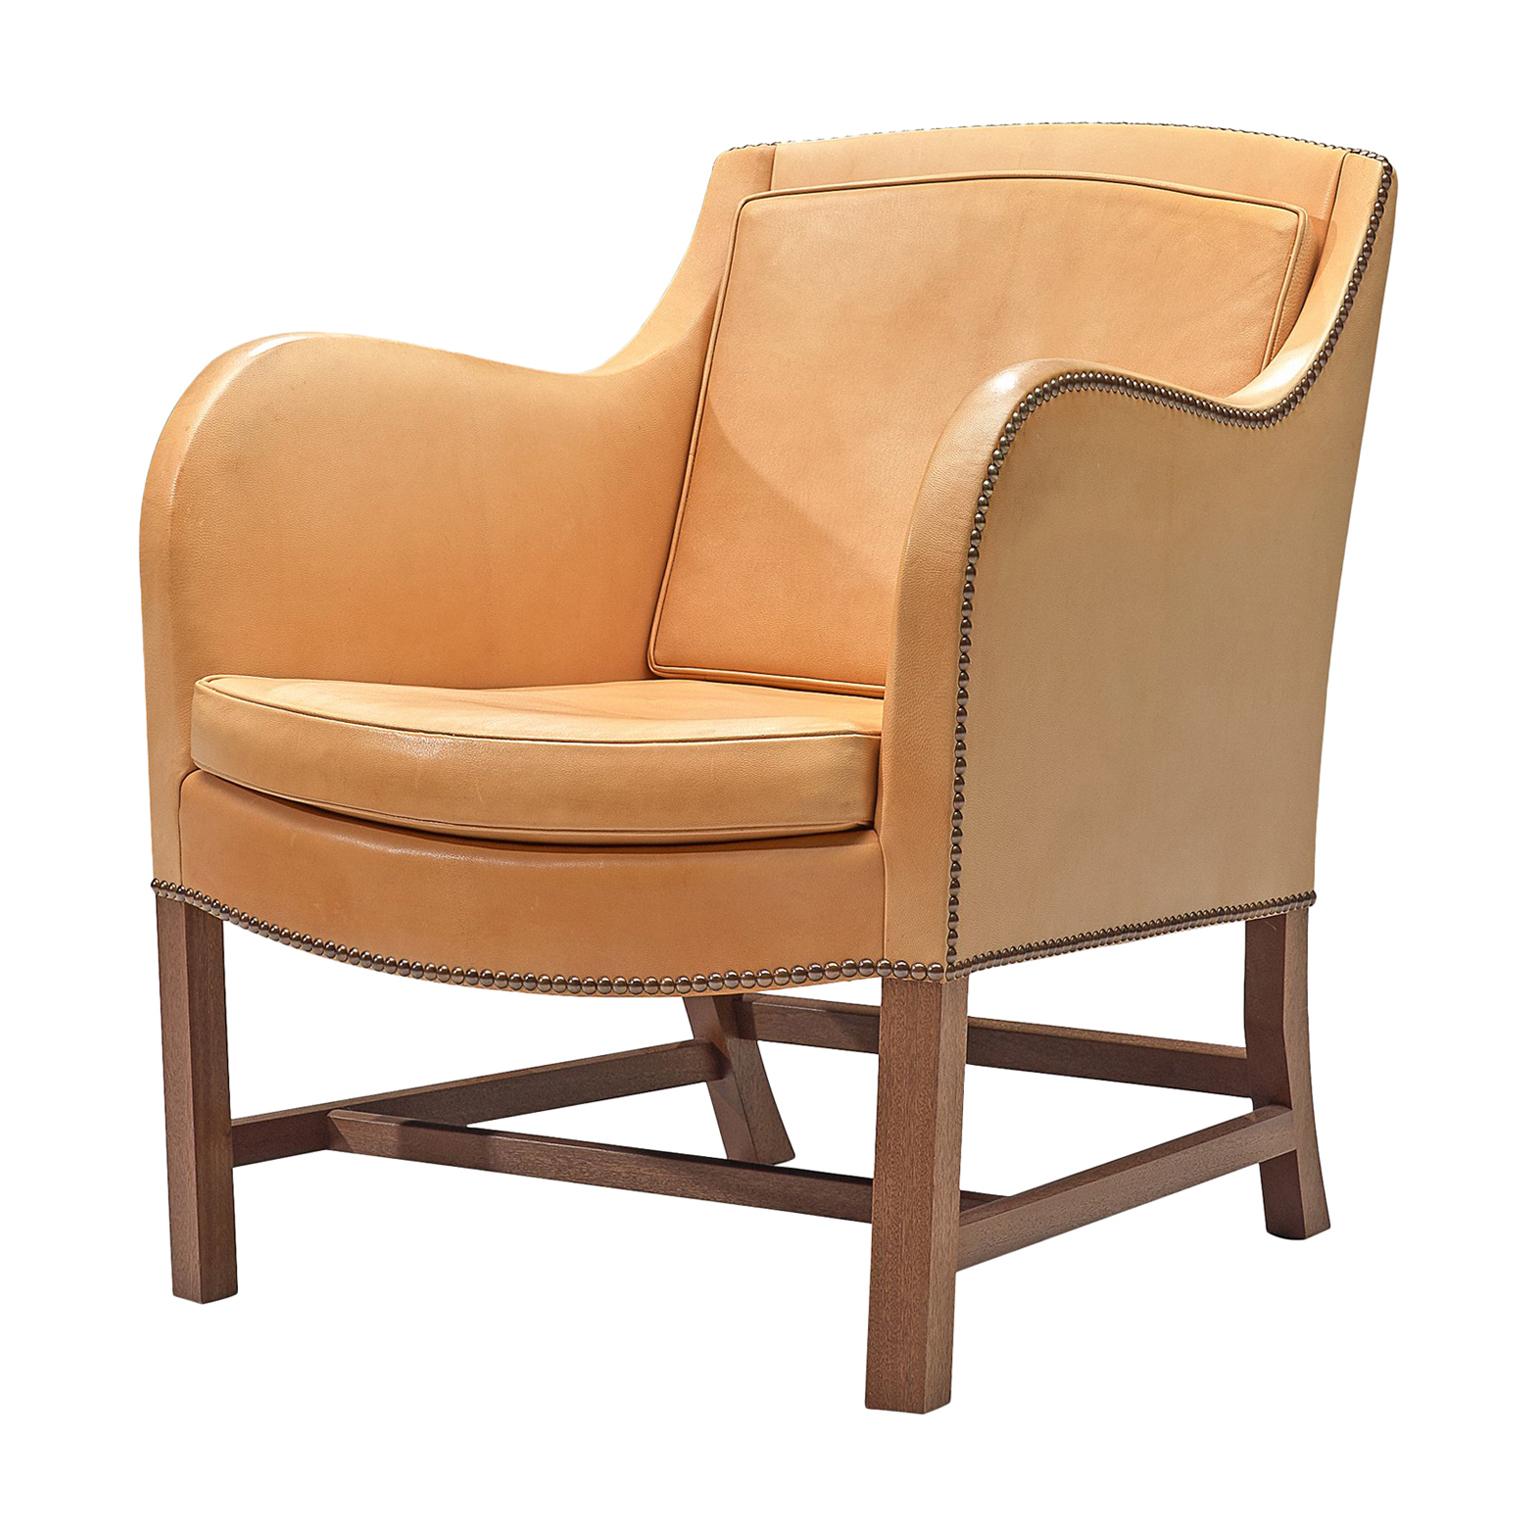 Kaare Klint and Edvard Kindt-Larsen 'Mix' Lounge Chair in Niger Leather